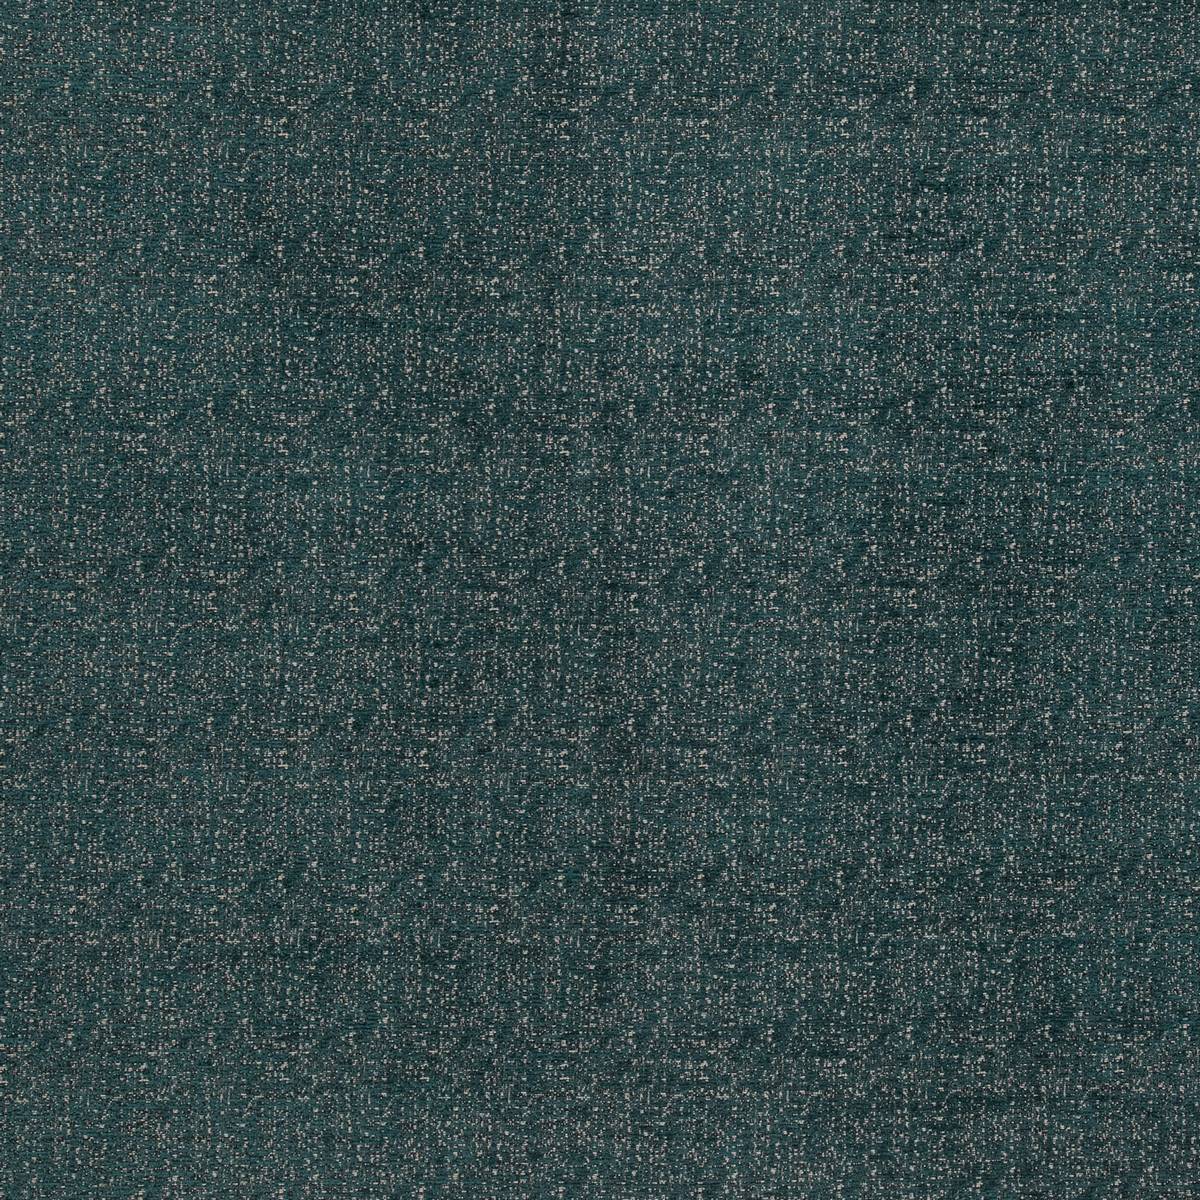 Ryedale Teal Fabric by iLiv